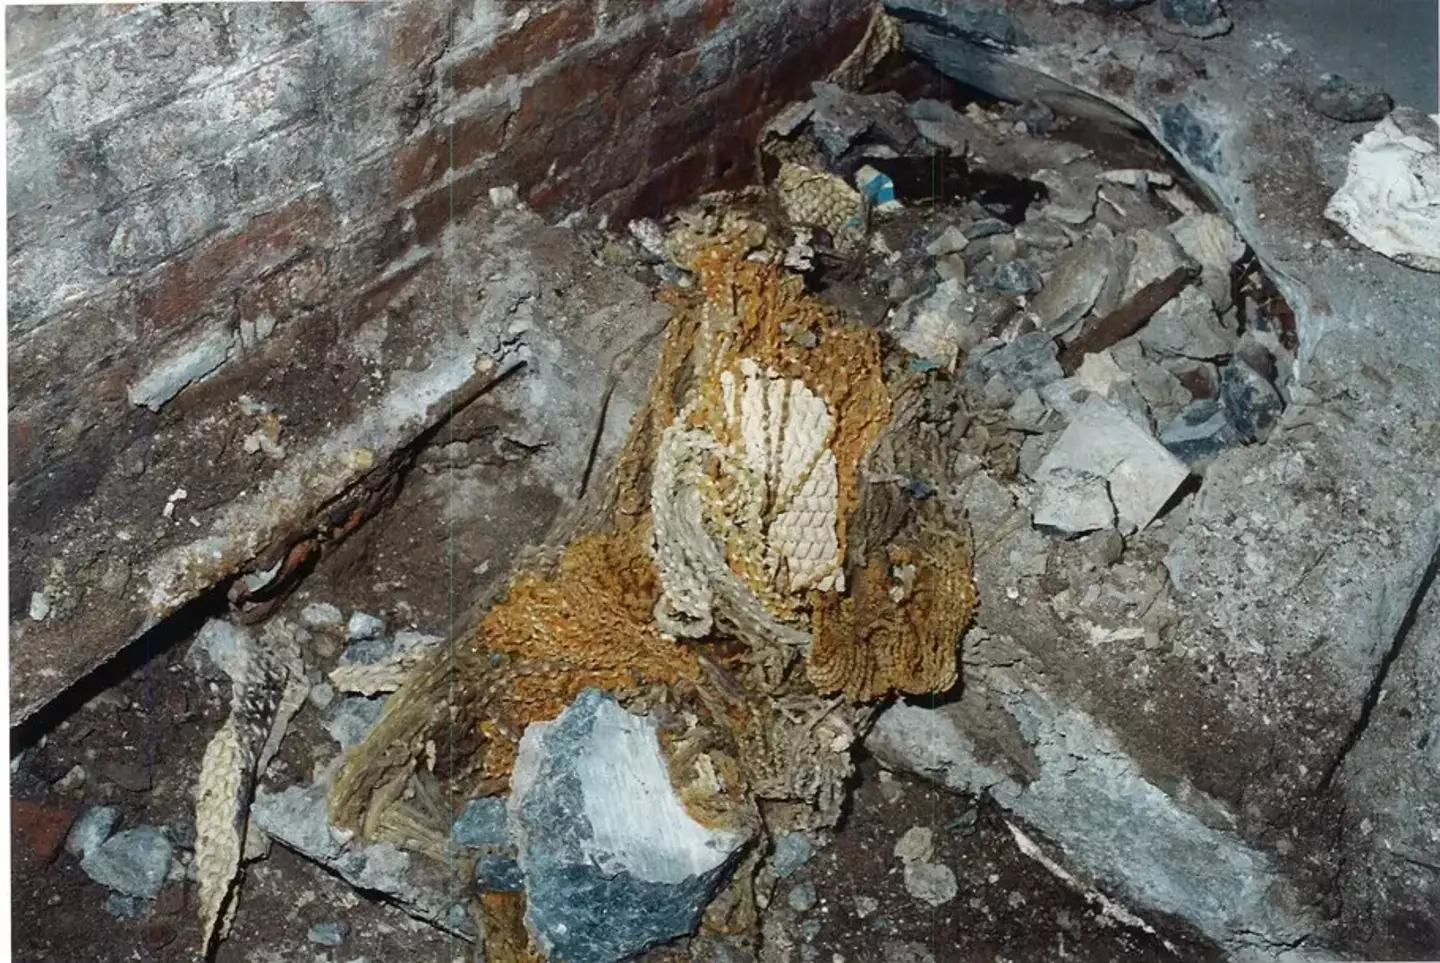 Patricia McGlone's remains were found encased in cement in 2003 (NYPD)